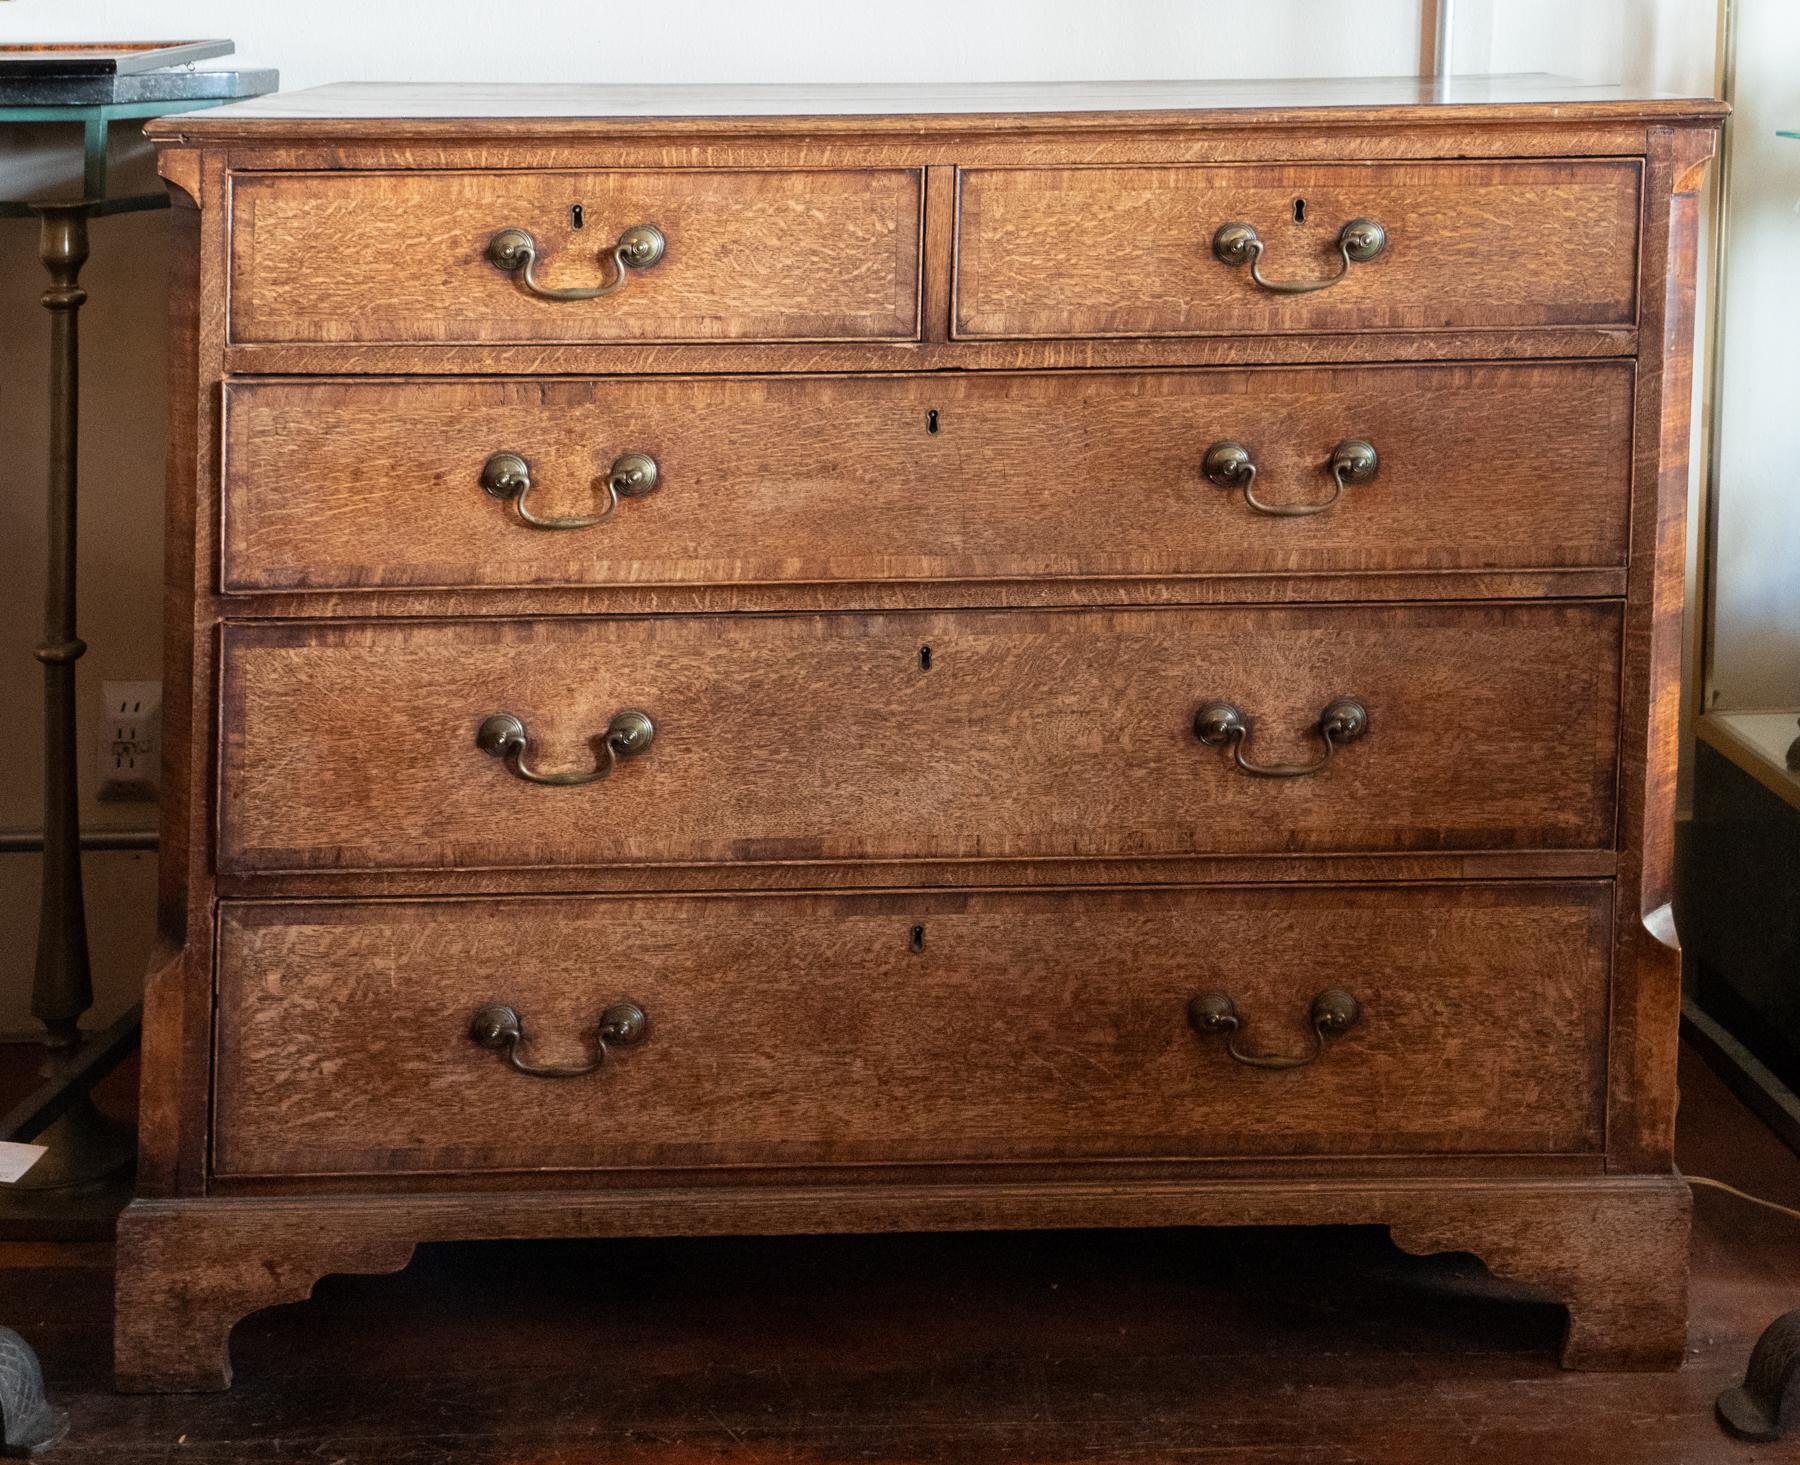 George III / Chippendale Oak Chest of Drawers. Quarter sawn oak, cross banding with canted corners. Very original condition. Retains the original brasses, steel locks and bracket feet. Old dry leather looking patina. Some shrinkage of the drawers,